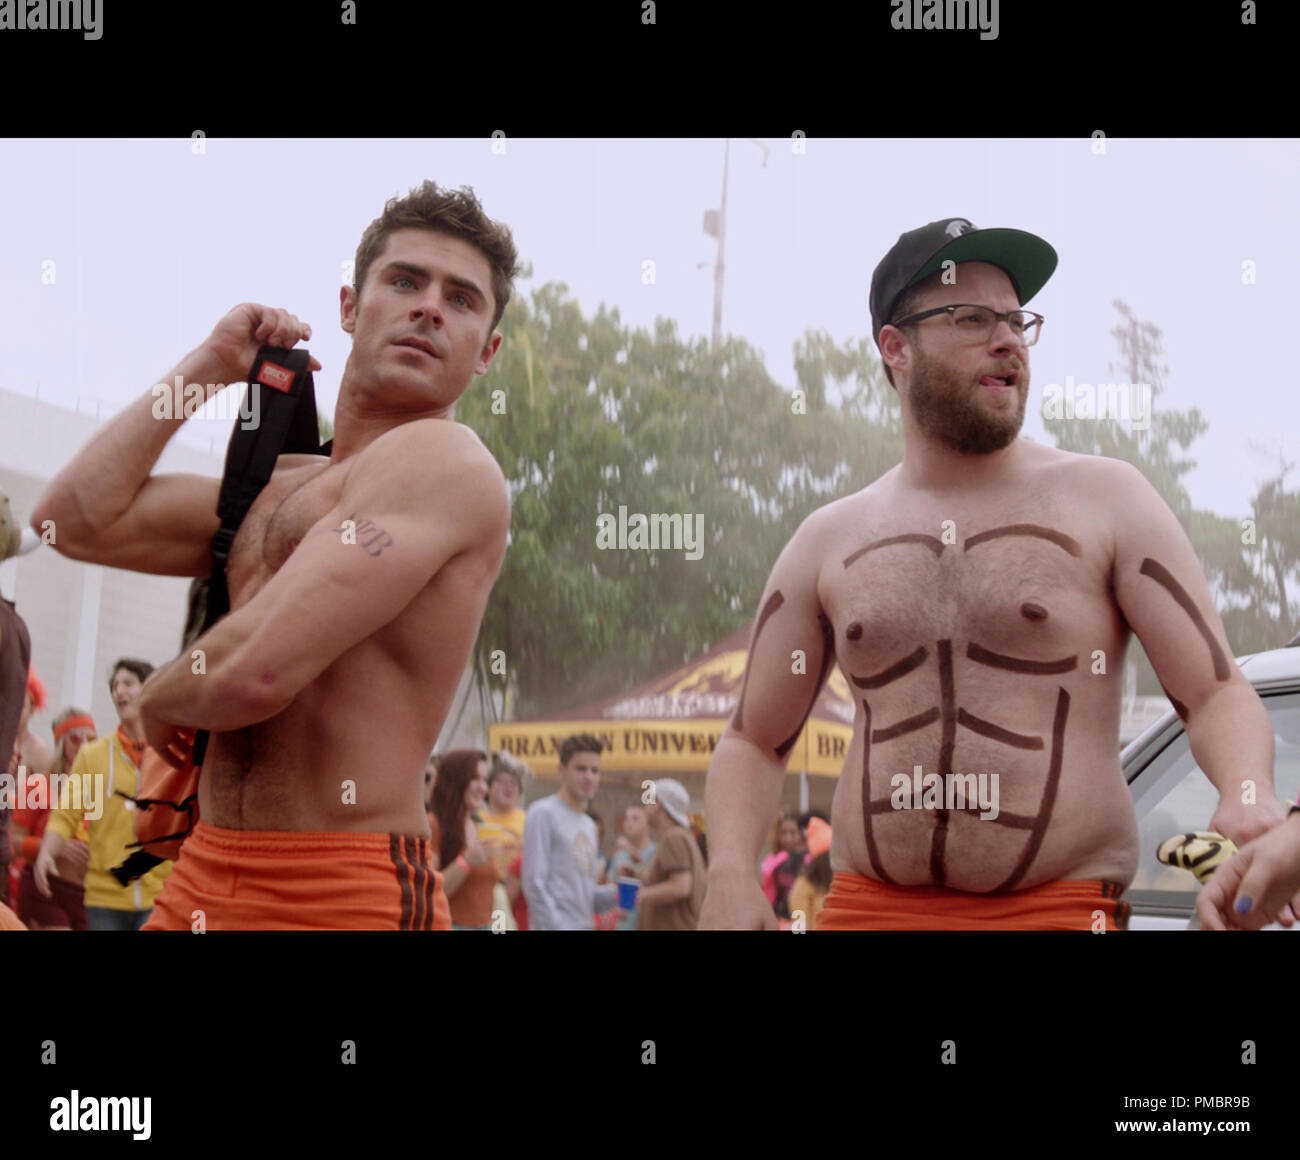 ZAC EFRON returns as Teddy Sanders in Neighbors 2: Sorority Rising, the  follow-up to 2014's most popular original comedy Stock Photo - Alamy